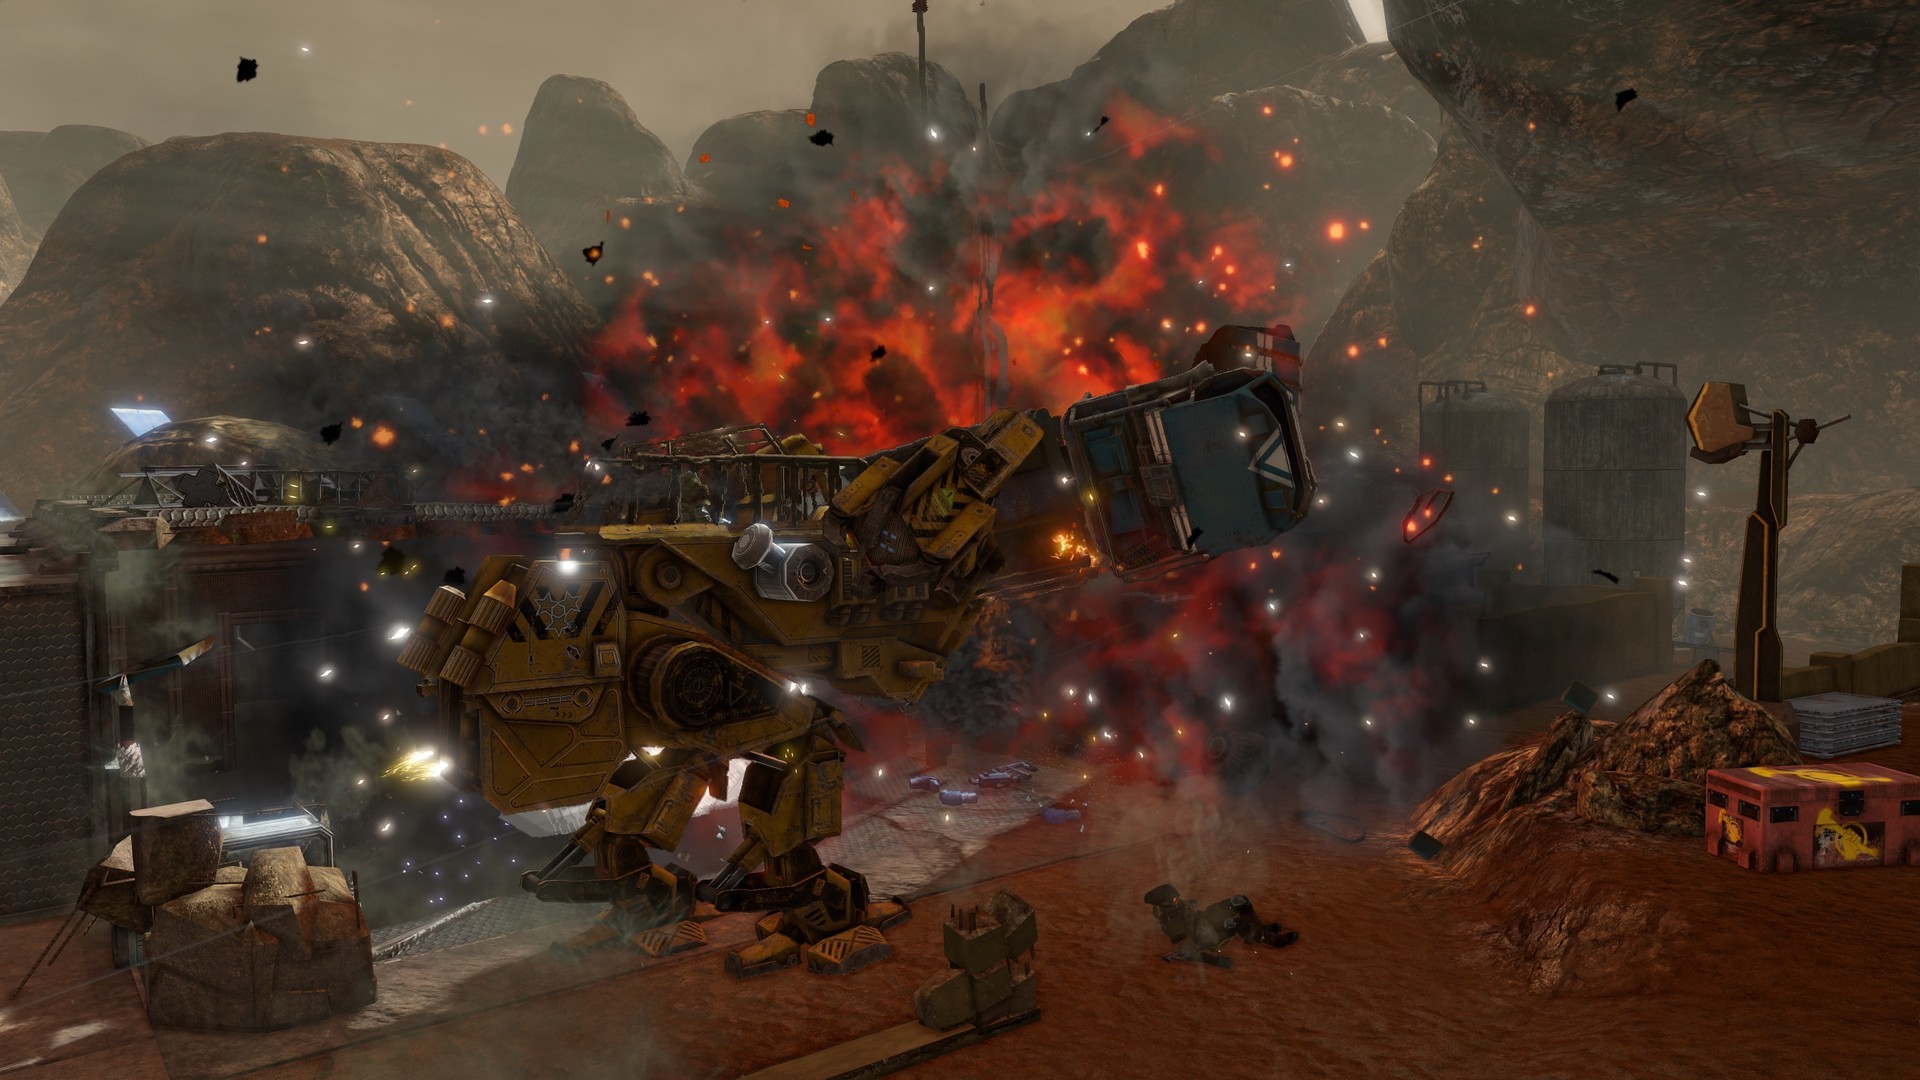 download red faction armageddon commando & recon edition for free